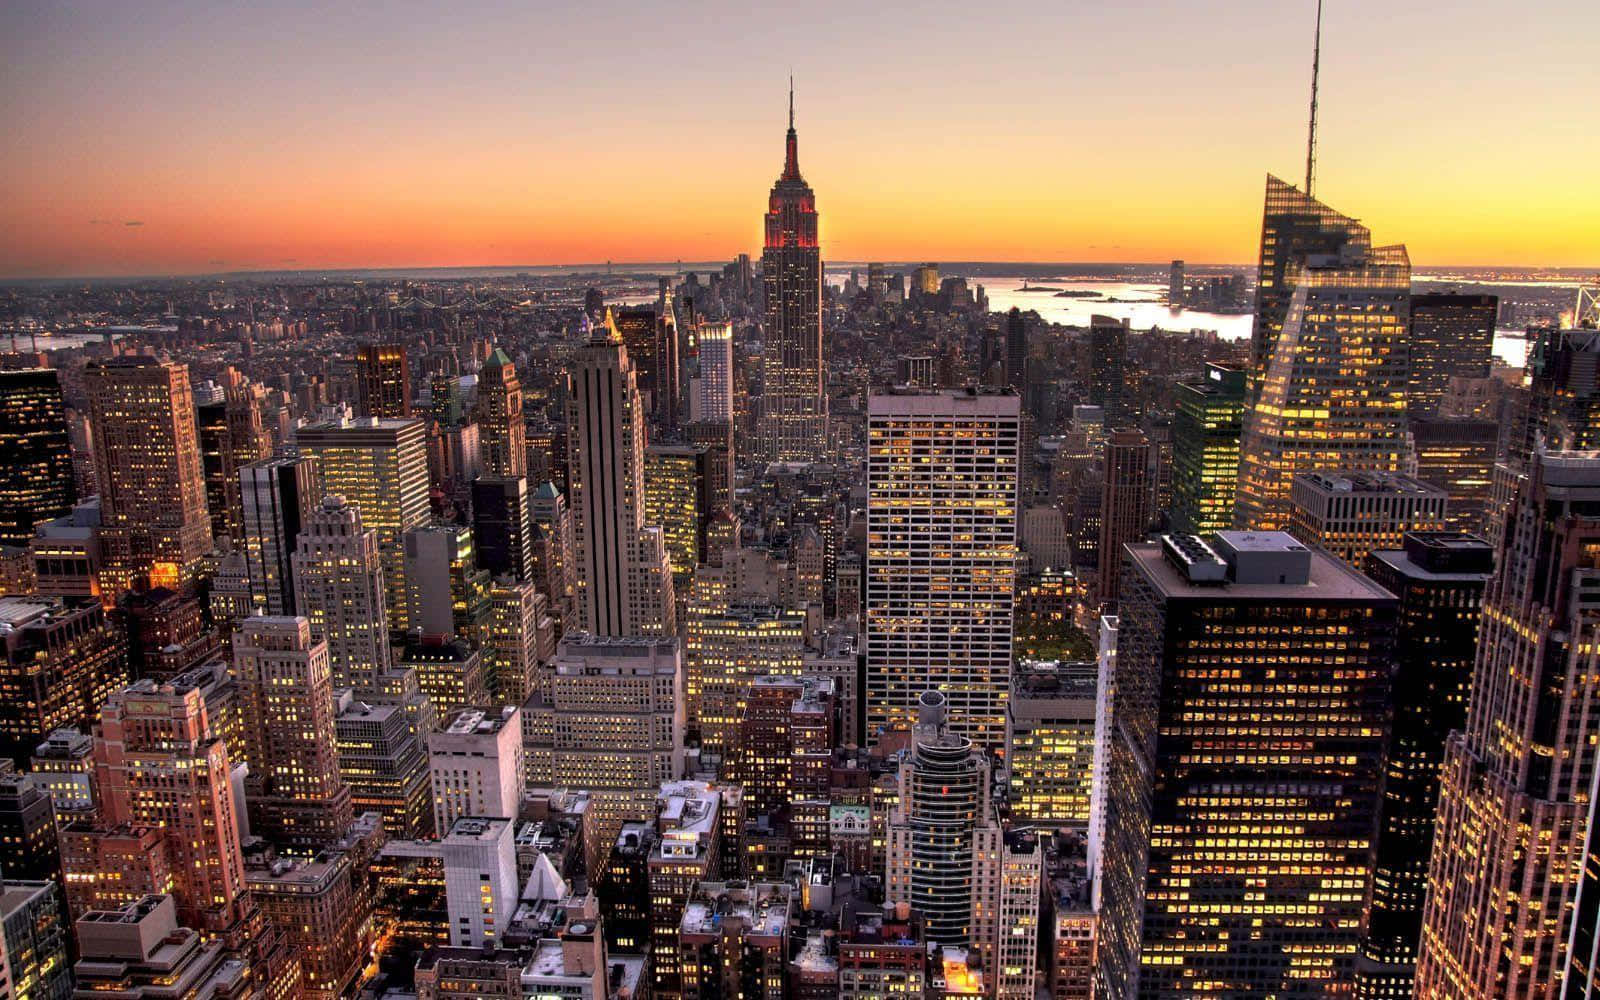 "The big apple from the top of beautiful New York City"